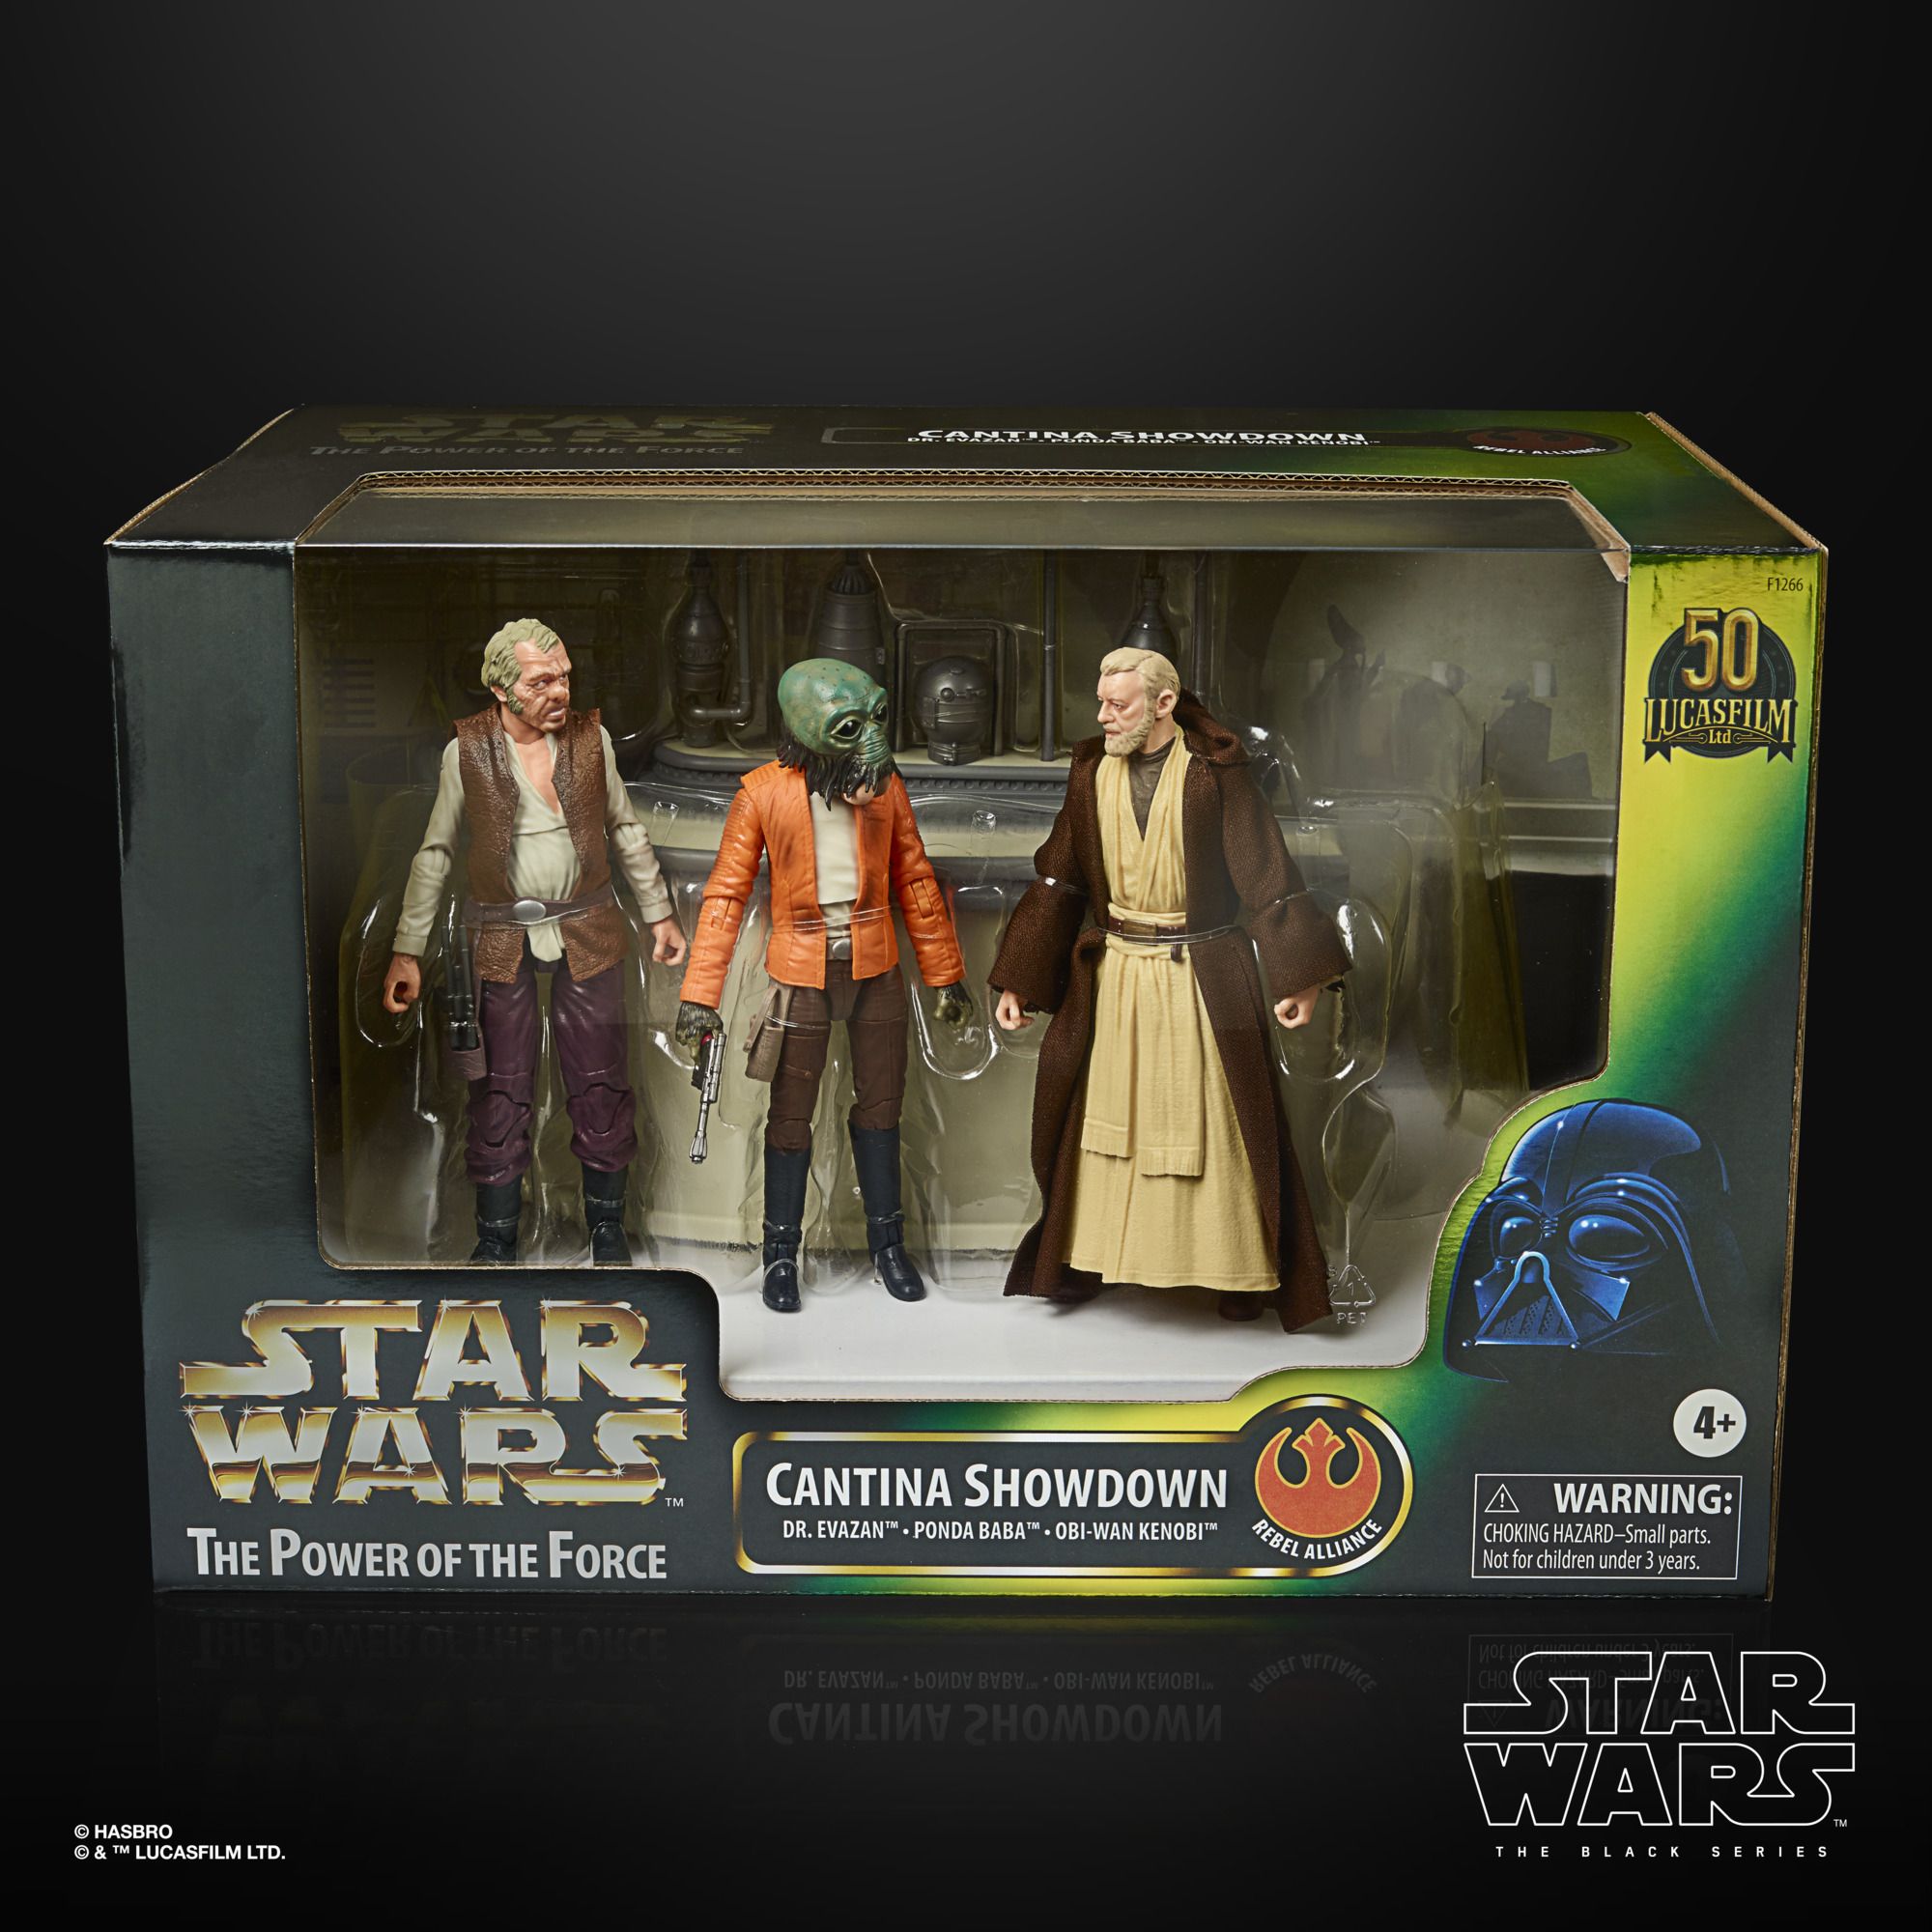 Star Wars The Black Series The Power of The Force Cantina Showdown Playset